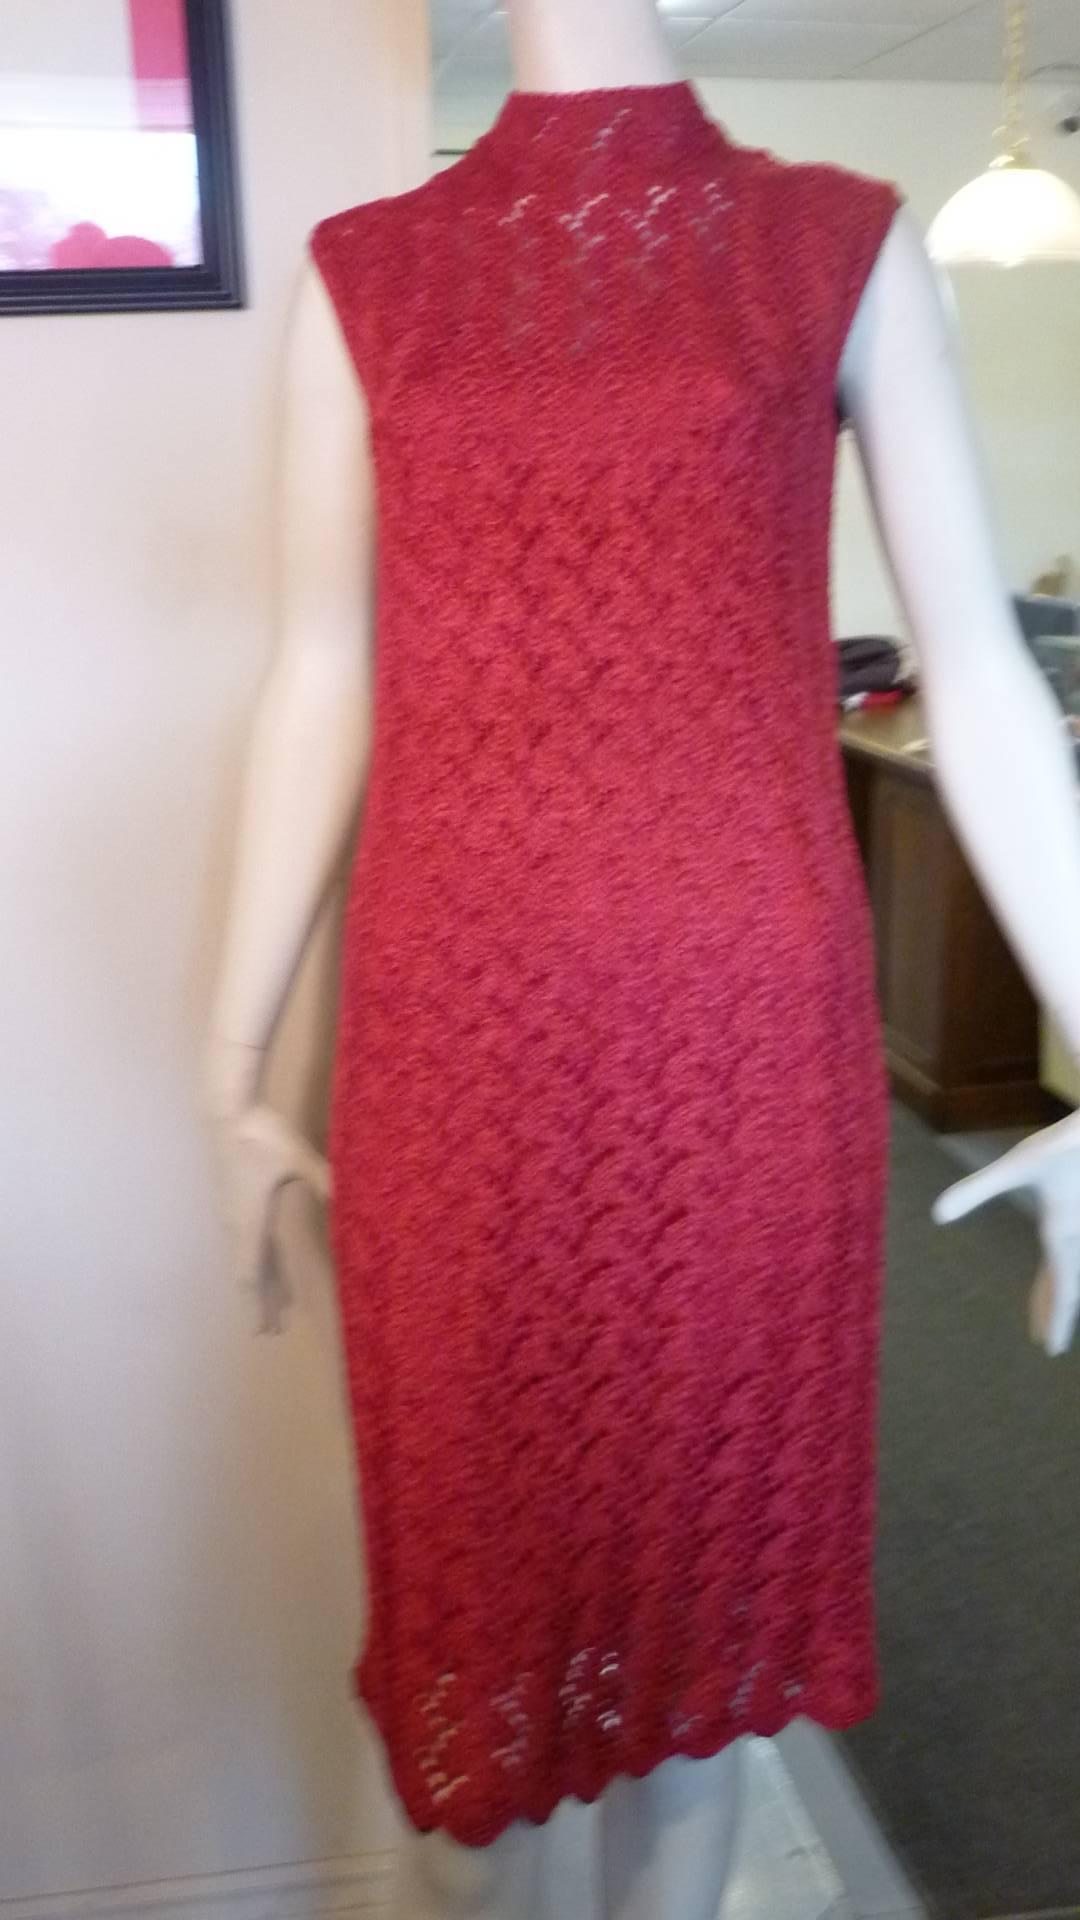 This is a beautifully made rasberry pink dress with a high collar; full lenght shell; scalloped hem, and braided belt.